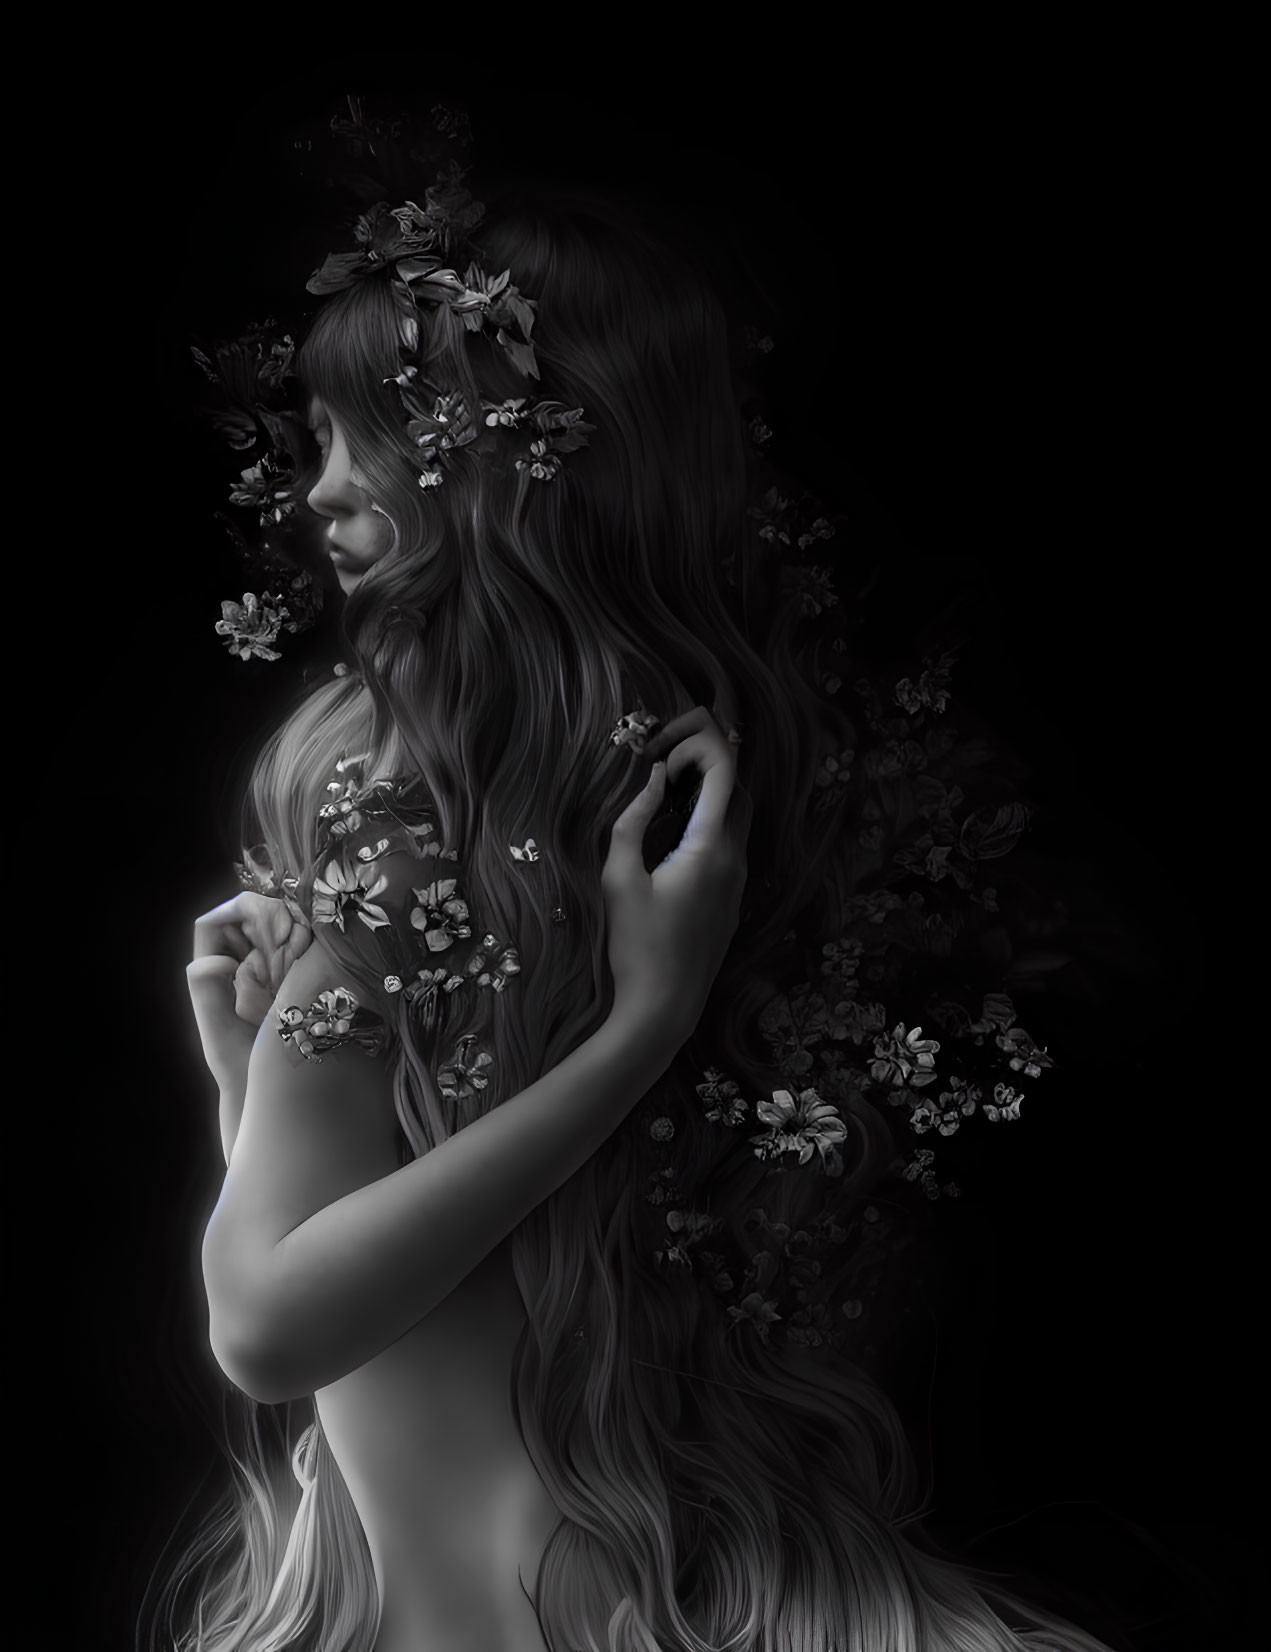 Monochromatic portrait with cascading hair and floral patterns on dark backdrop